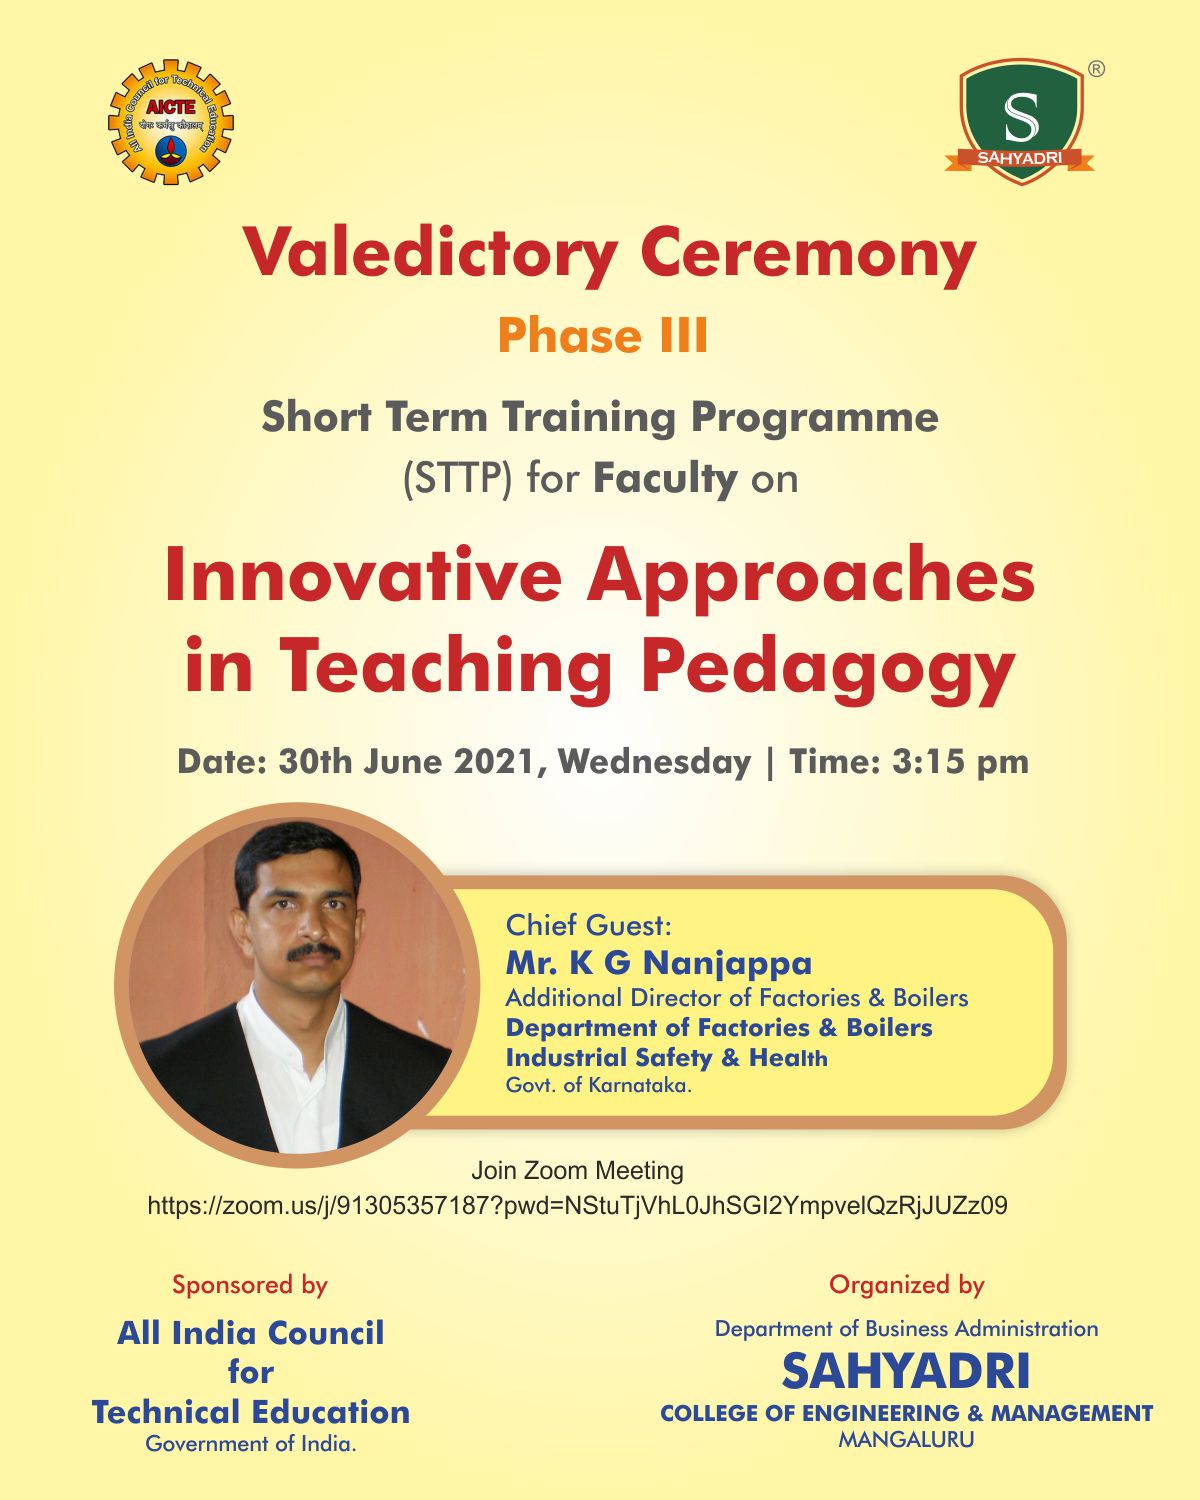 Valedictory Ceremony of AICTE Sponsored Short Term Training Programme (STTP) Phase III organized by Sahyadri on “Innovative Approaches in Teaching Pedagogy”